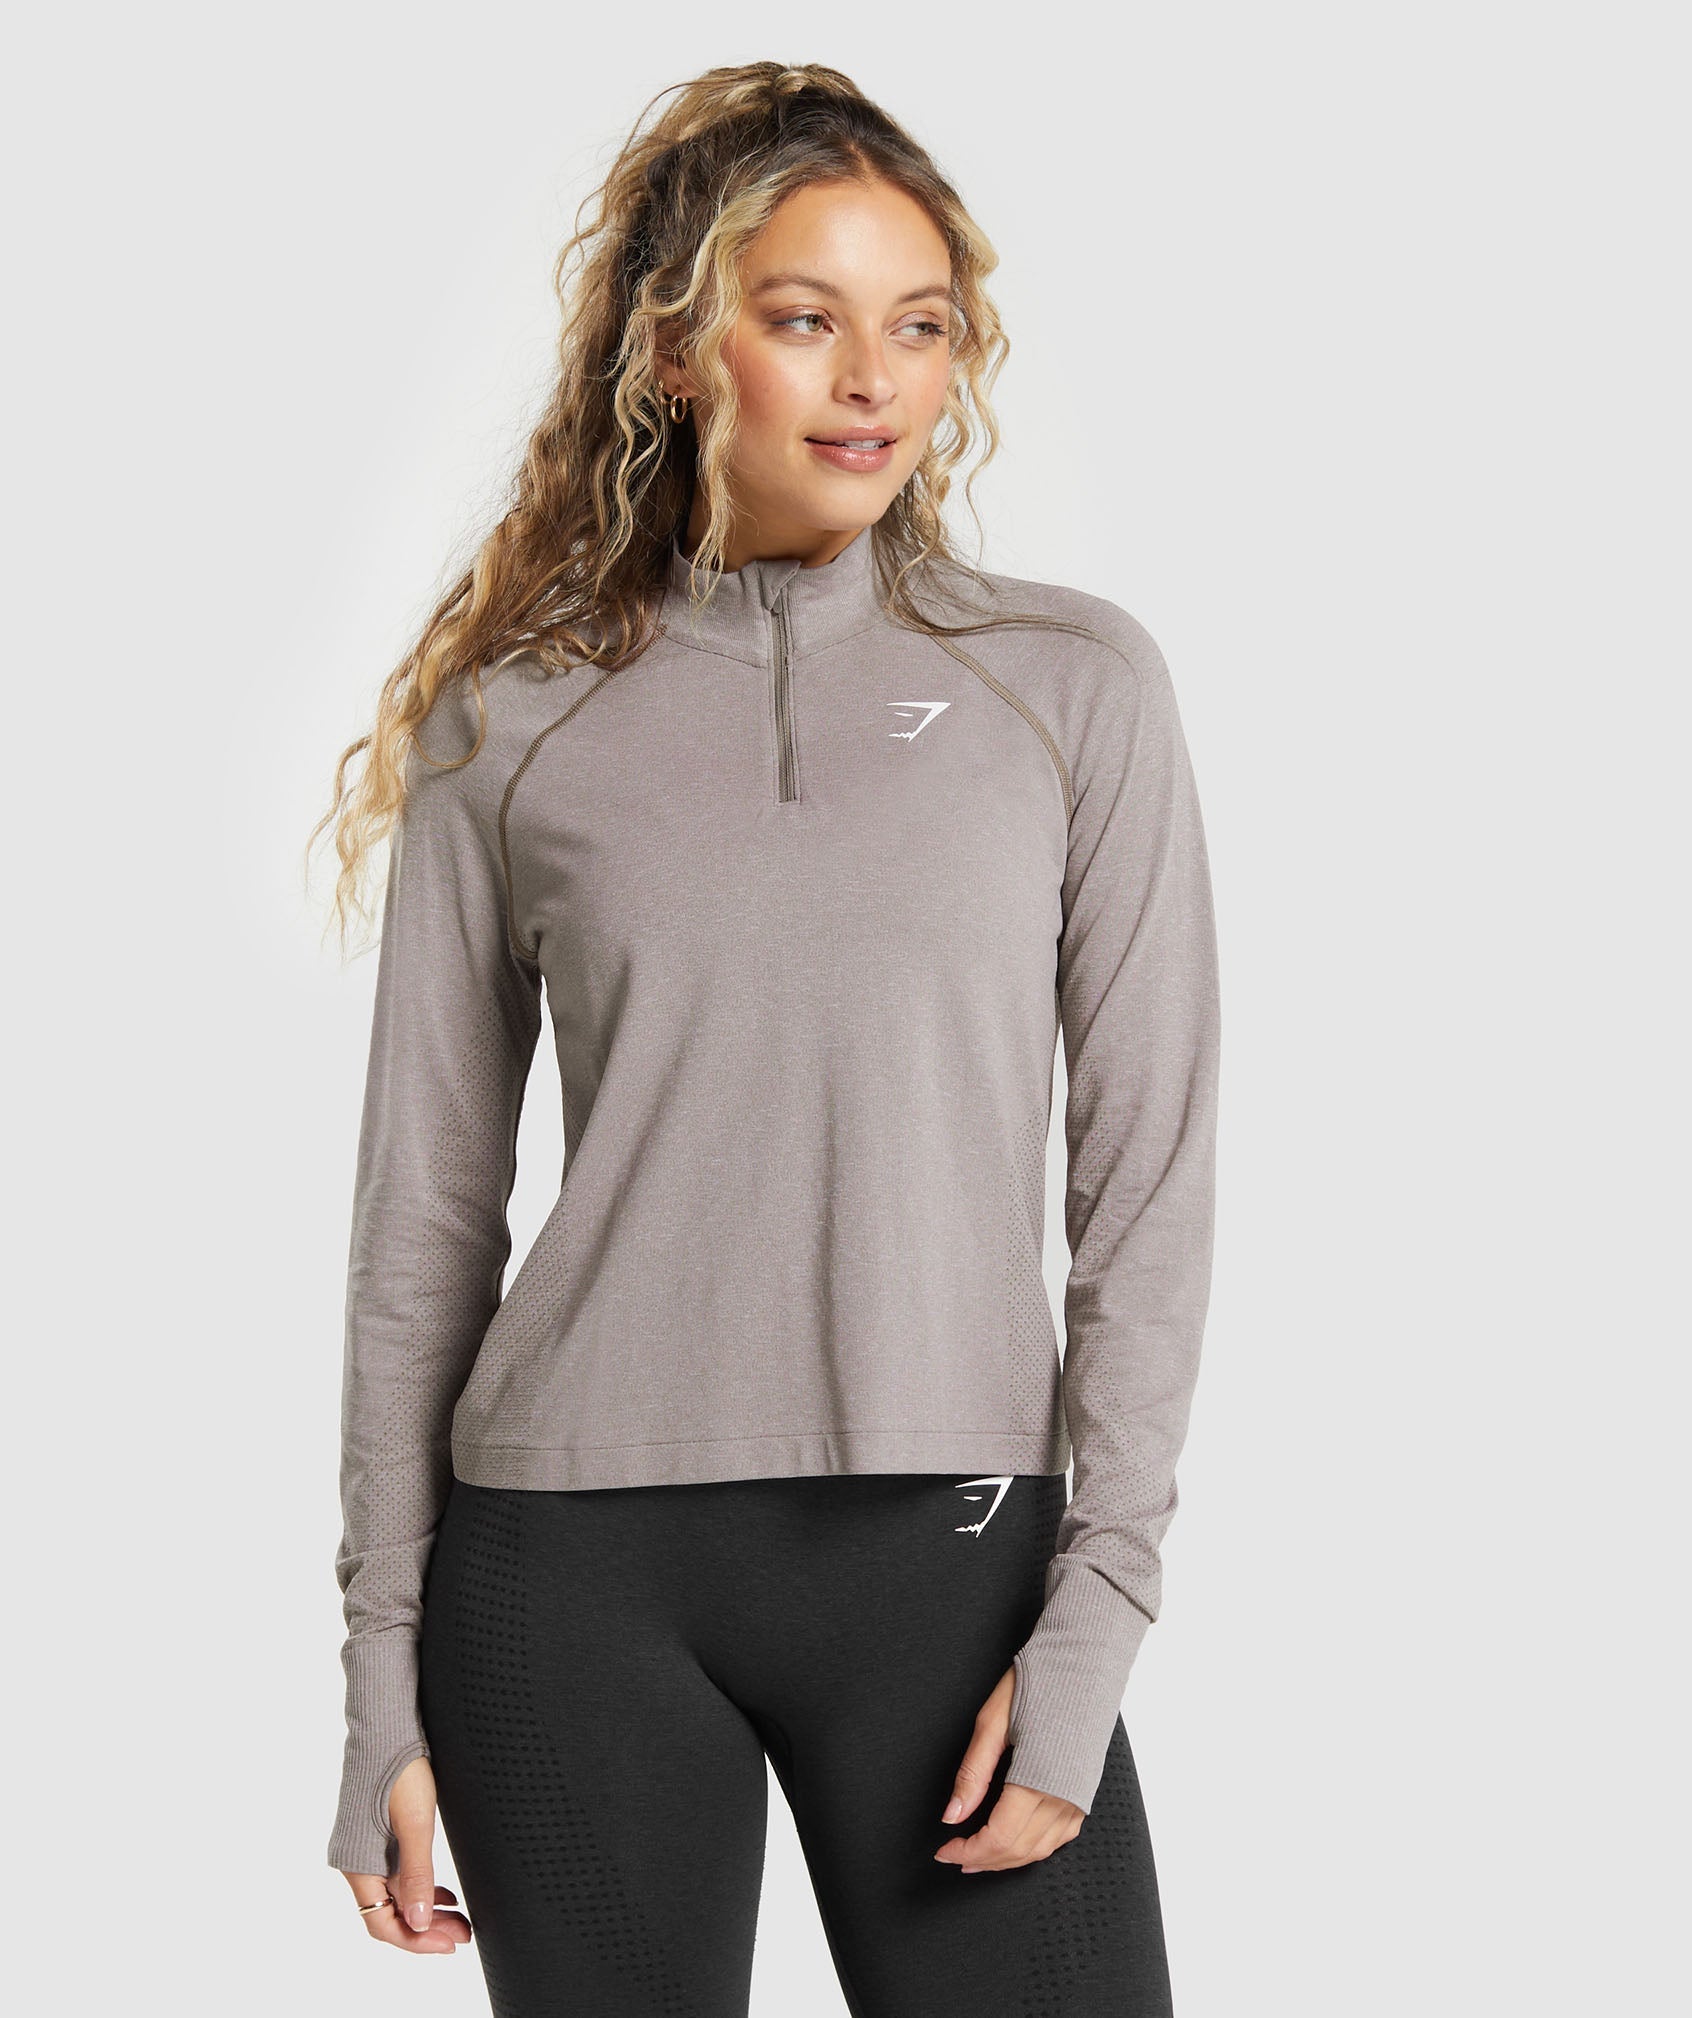 Vital Seamless 2.0 1/4 Zip Pullover in Warm Taupe Marl